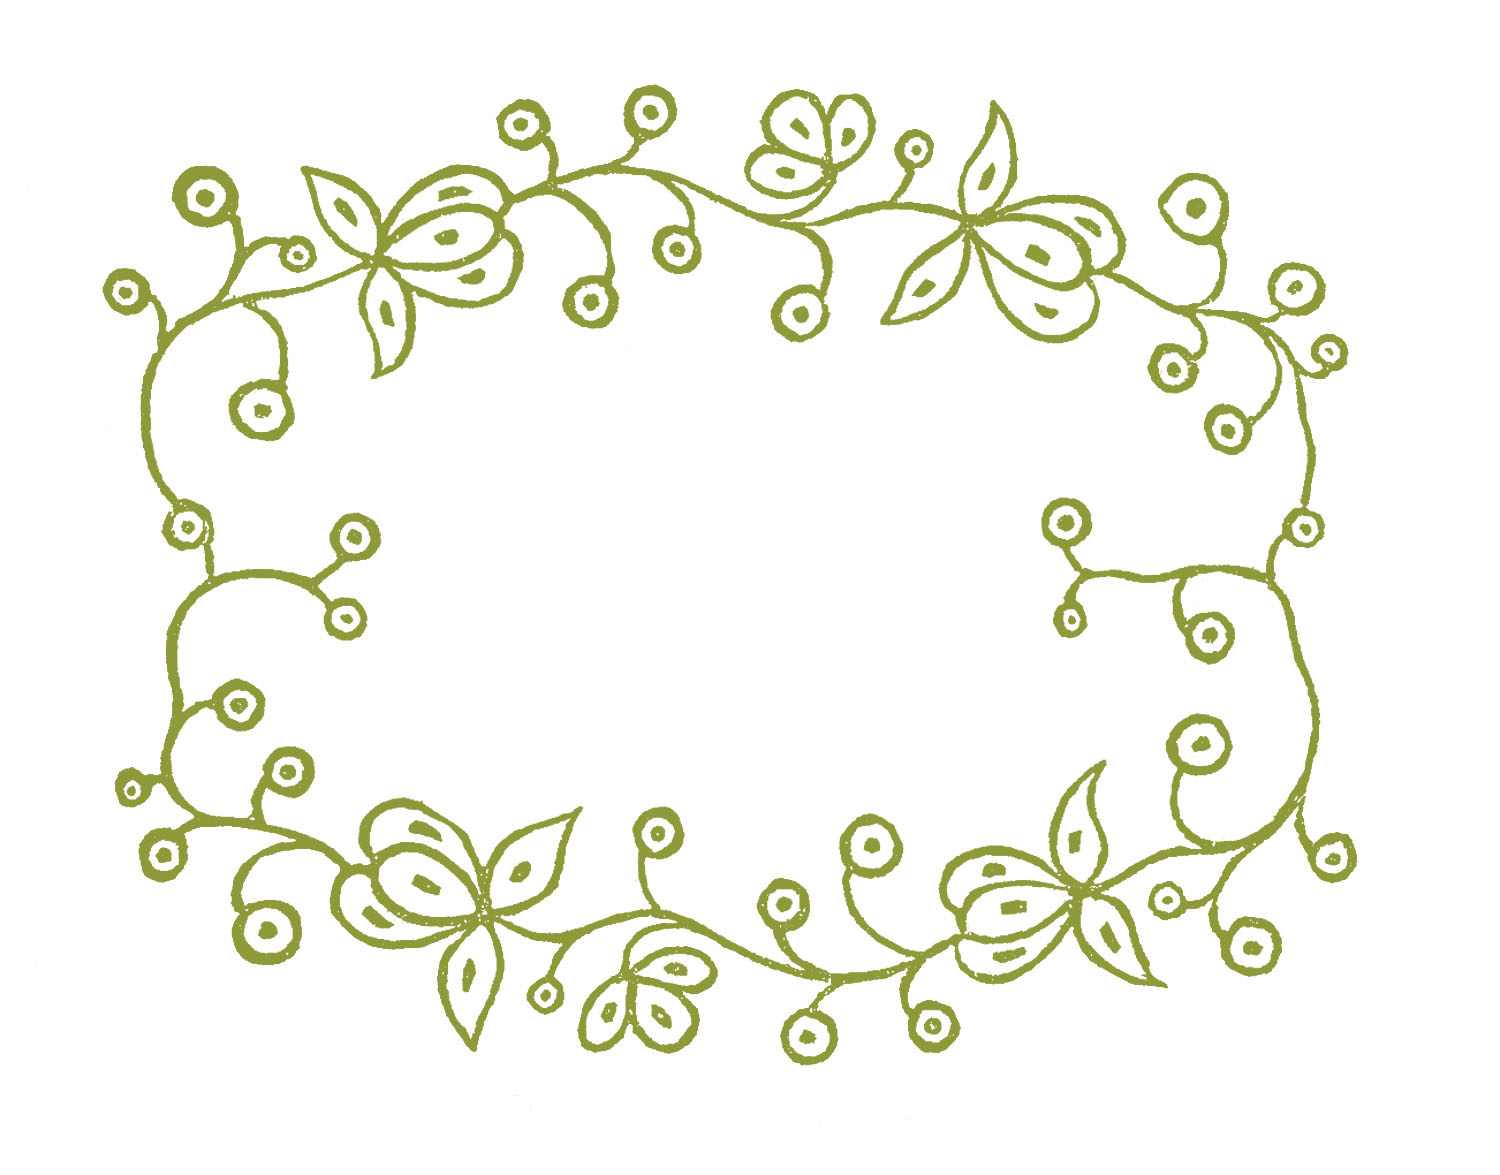 Royalty Free Images - Embroidery Patterns - Floral Frames - The ...